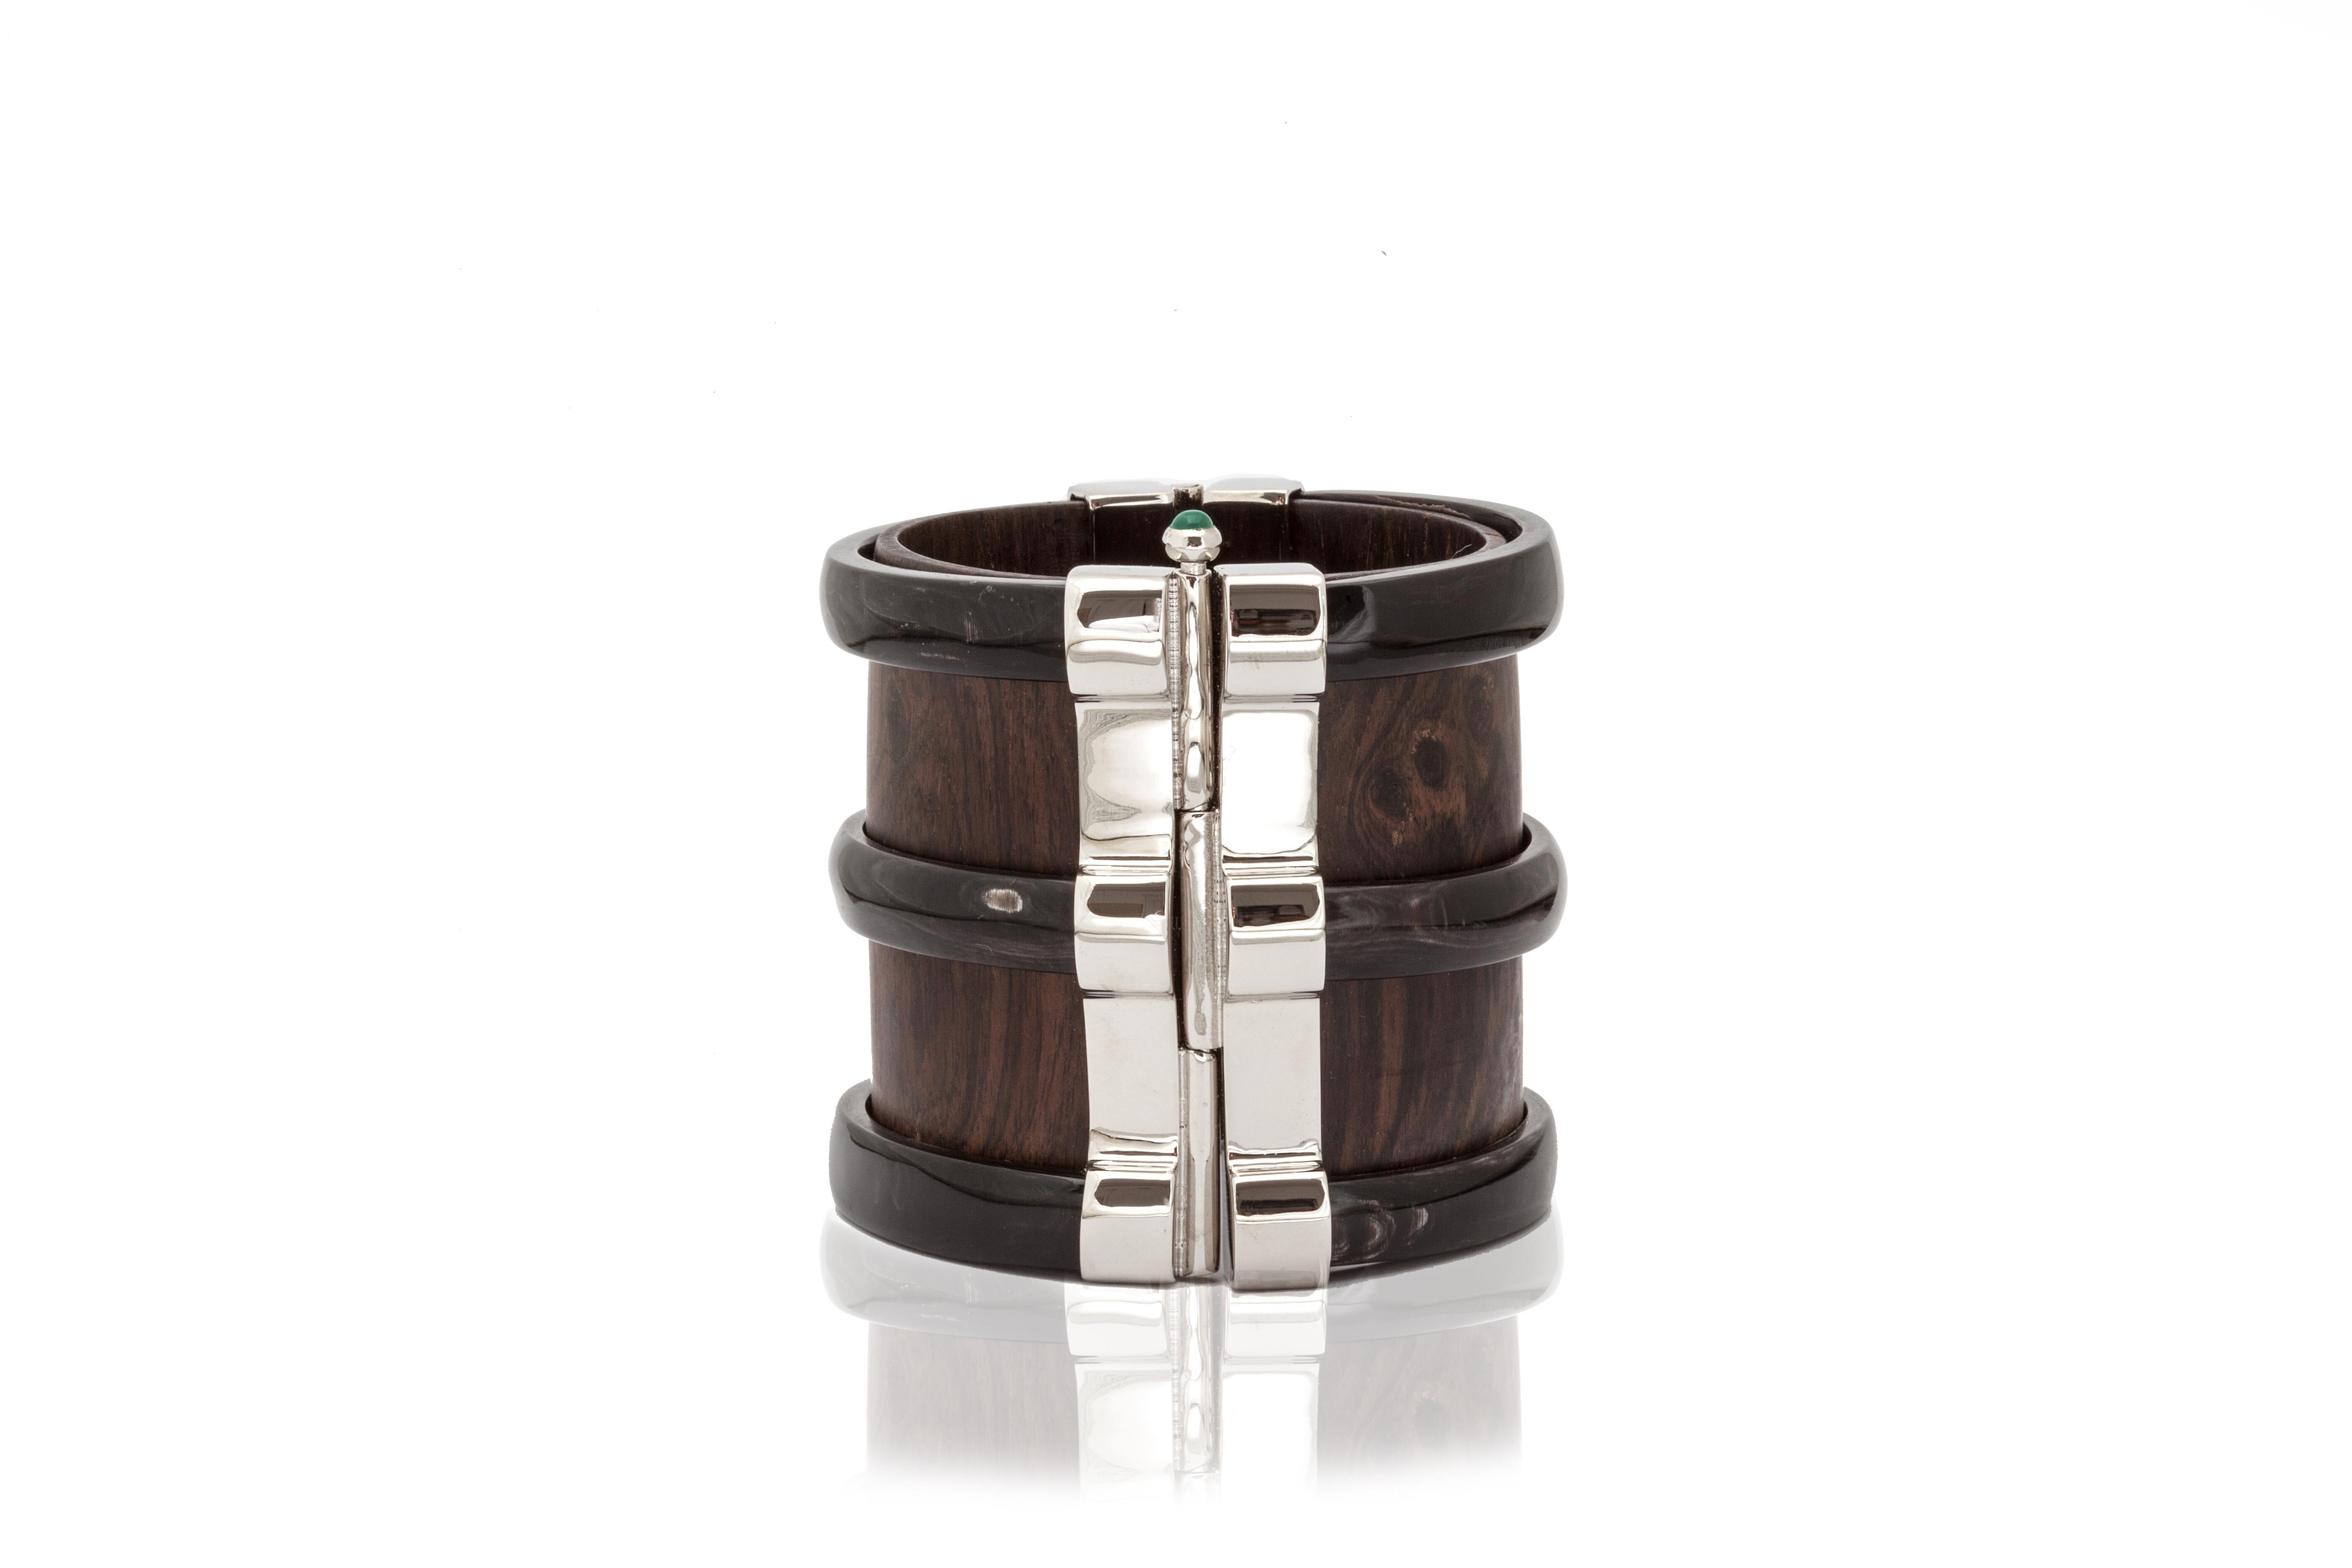 Cuff bracelet crafted from ebony wood and African cow horn. The customisable silver pin-clasp is set with a choice of ruby, sapphire or emerald from conflict-free mines in Zambia. 

Please note that horn inclusions and slight irregularities may